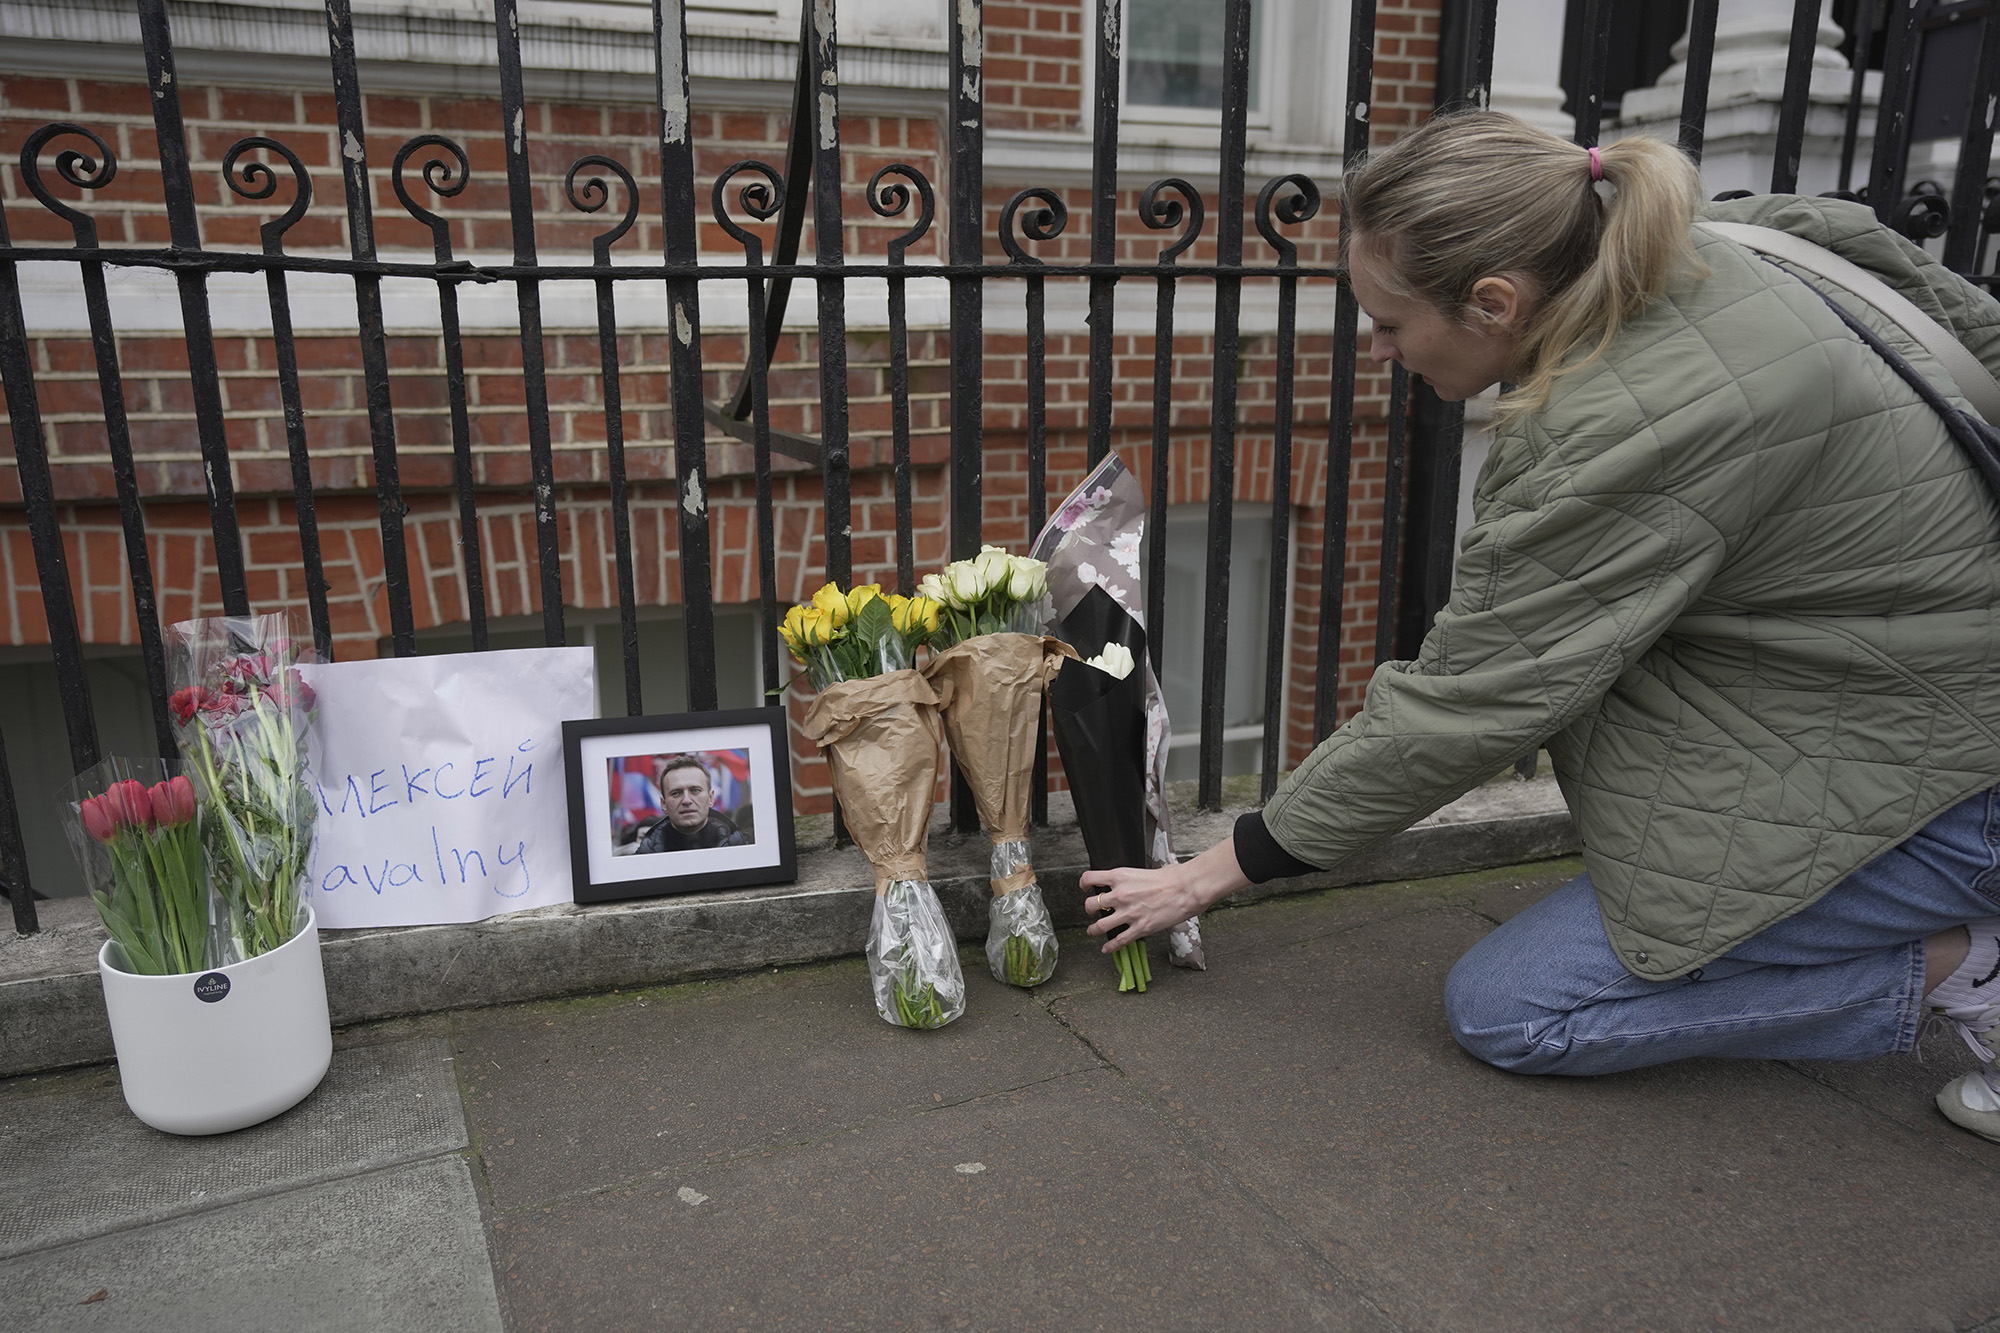 A woman lays floral tribute opposite the Russian Embassy in London, on February 16, in reaction to the news that jailed Russian opposition leader Alexey Navalny has died in a Russian prison.